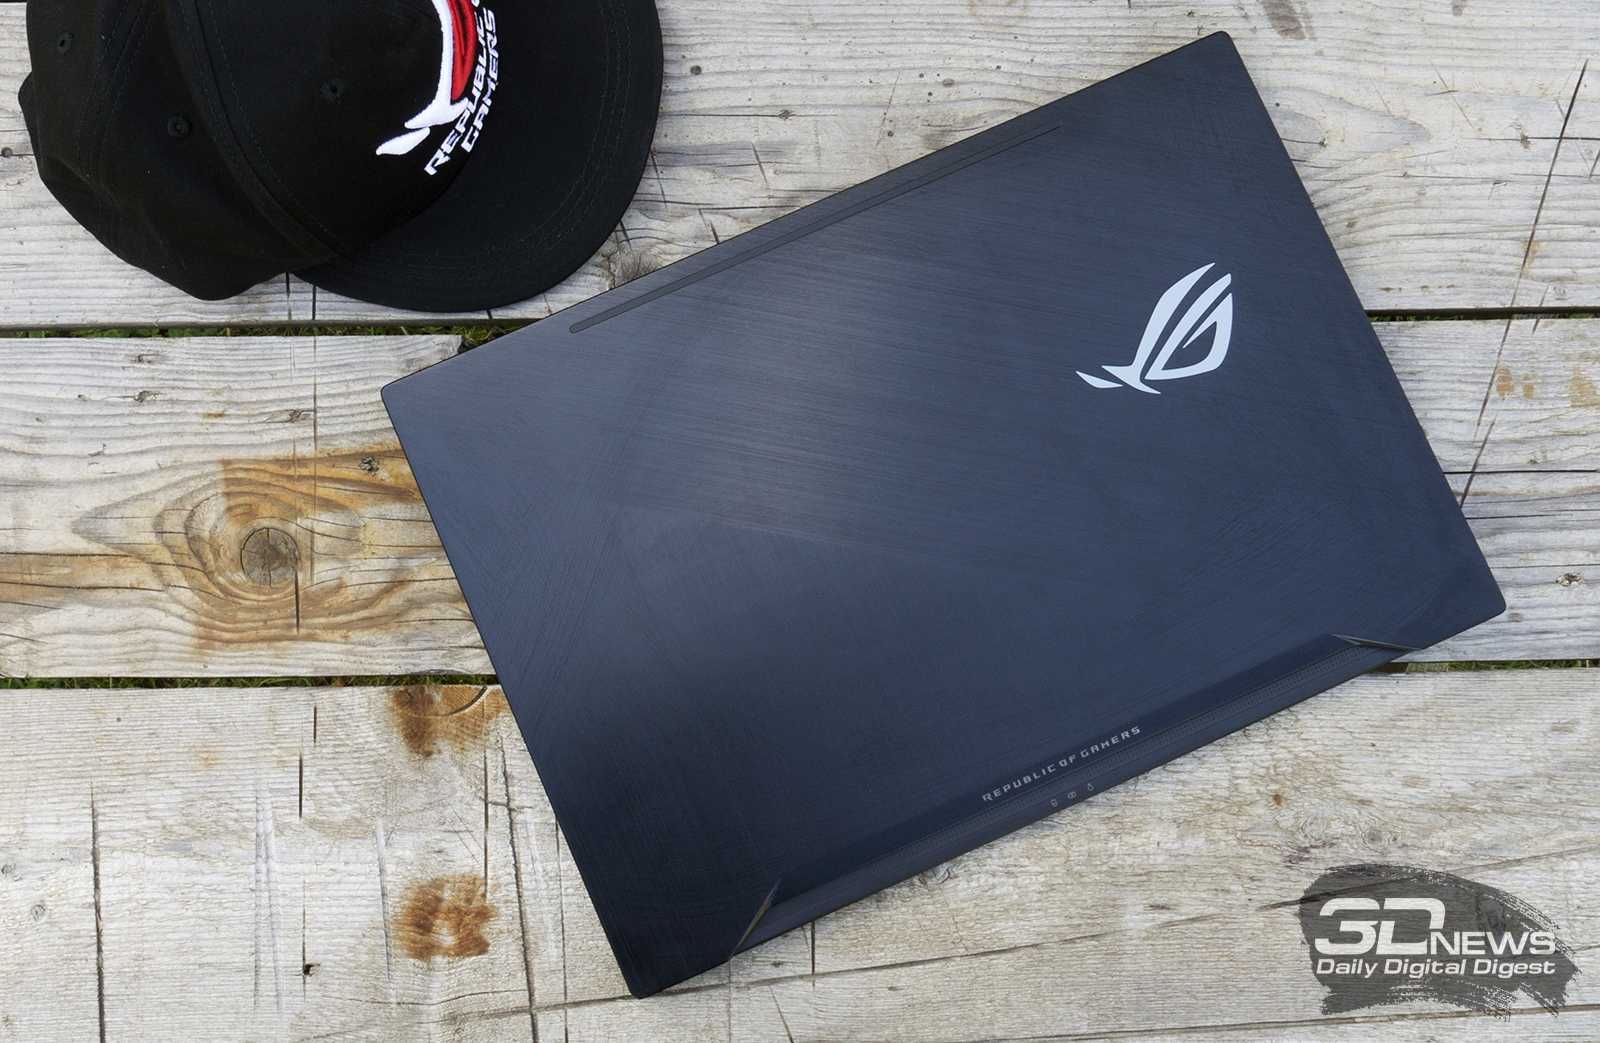 Asus rog strix gl553ve review - multimedia laptop with core i7-7700hq and nvidia gtx 1050 ti hardware